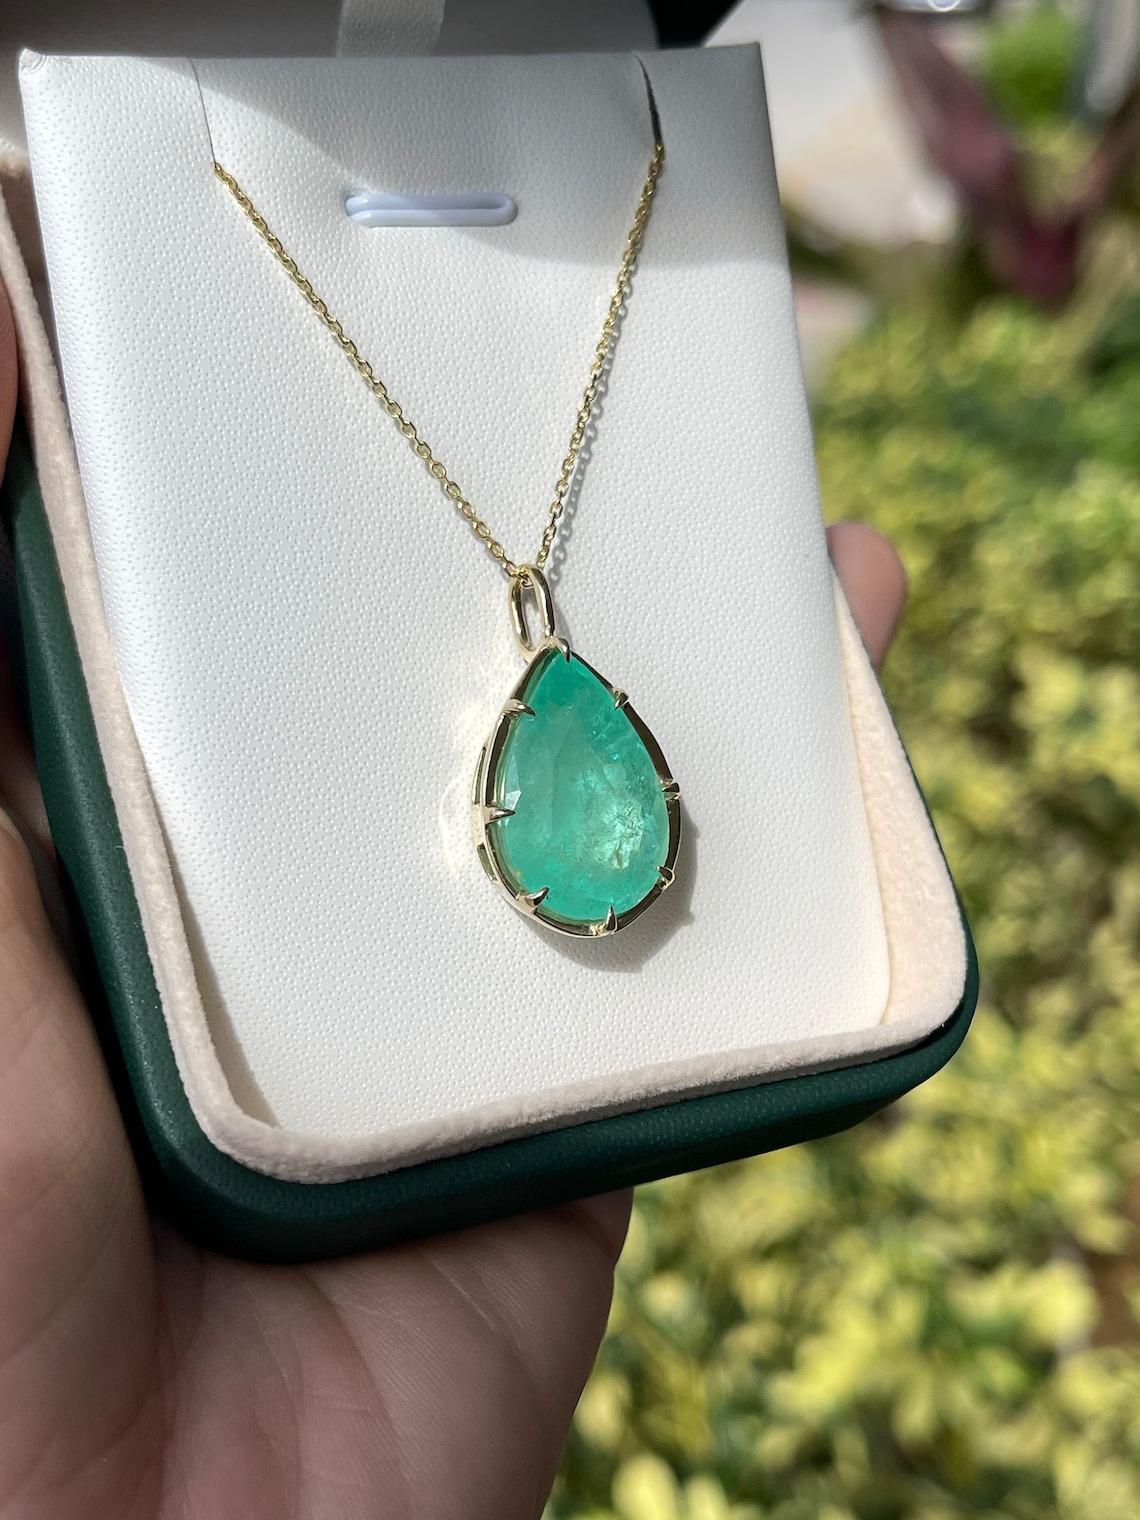 Contemporary 16.15ct 14K Massive Pear Vivid Colombian Emerald 8 Claw Prong Pendant Necklace For Sale